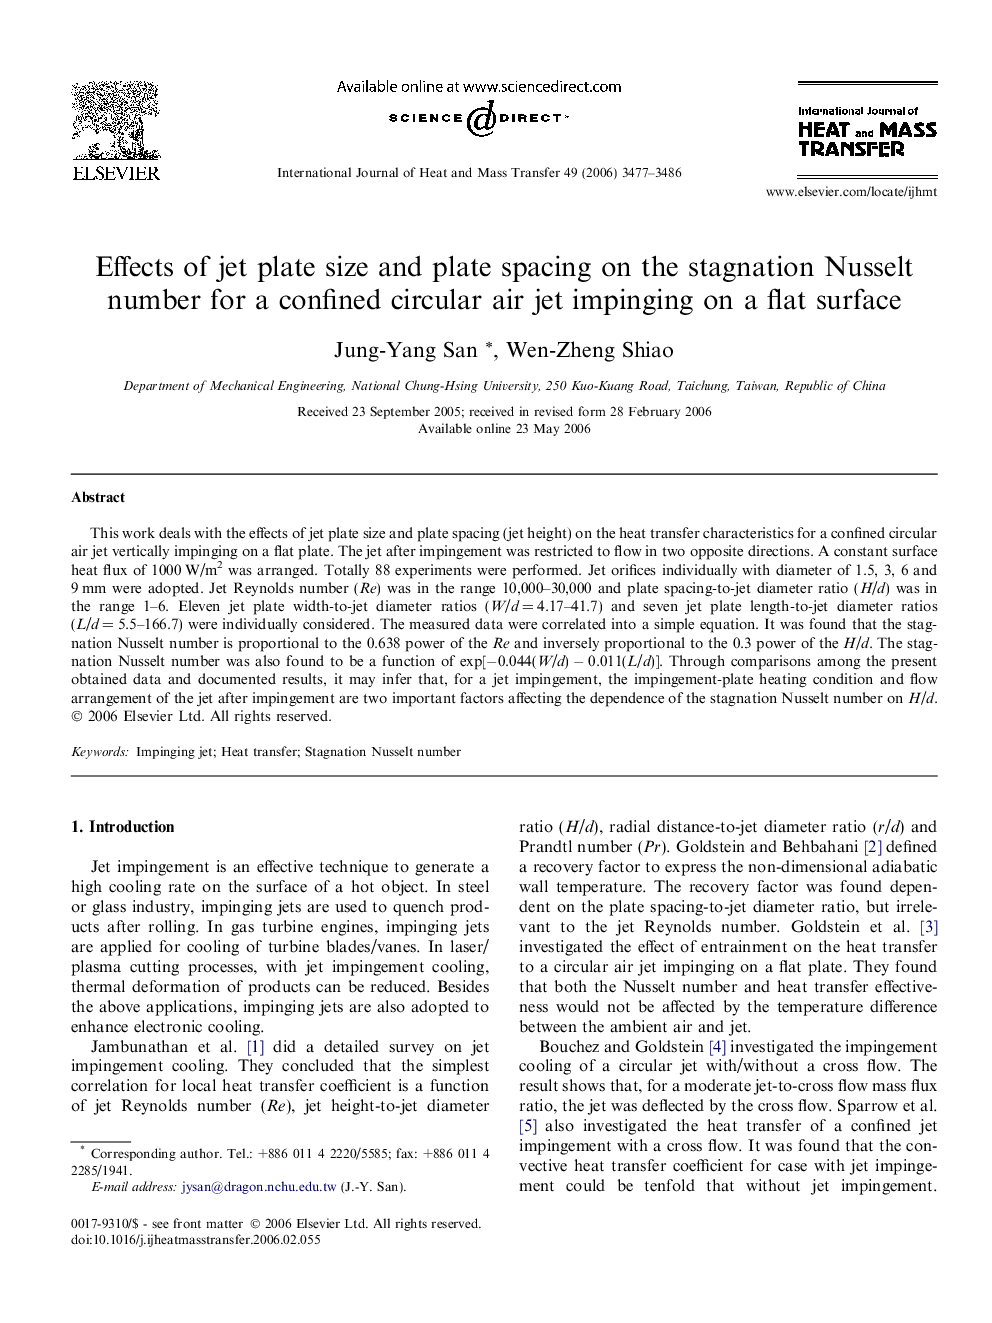 Effects of jet plate size and plate spacing on the stagnation Nusselt number for a confined circular air jet impinging on a flat surface